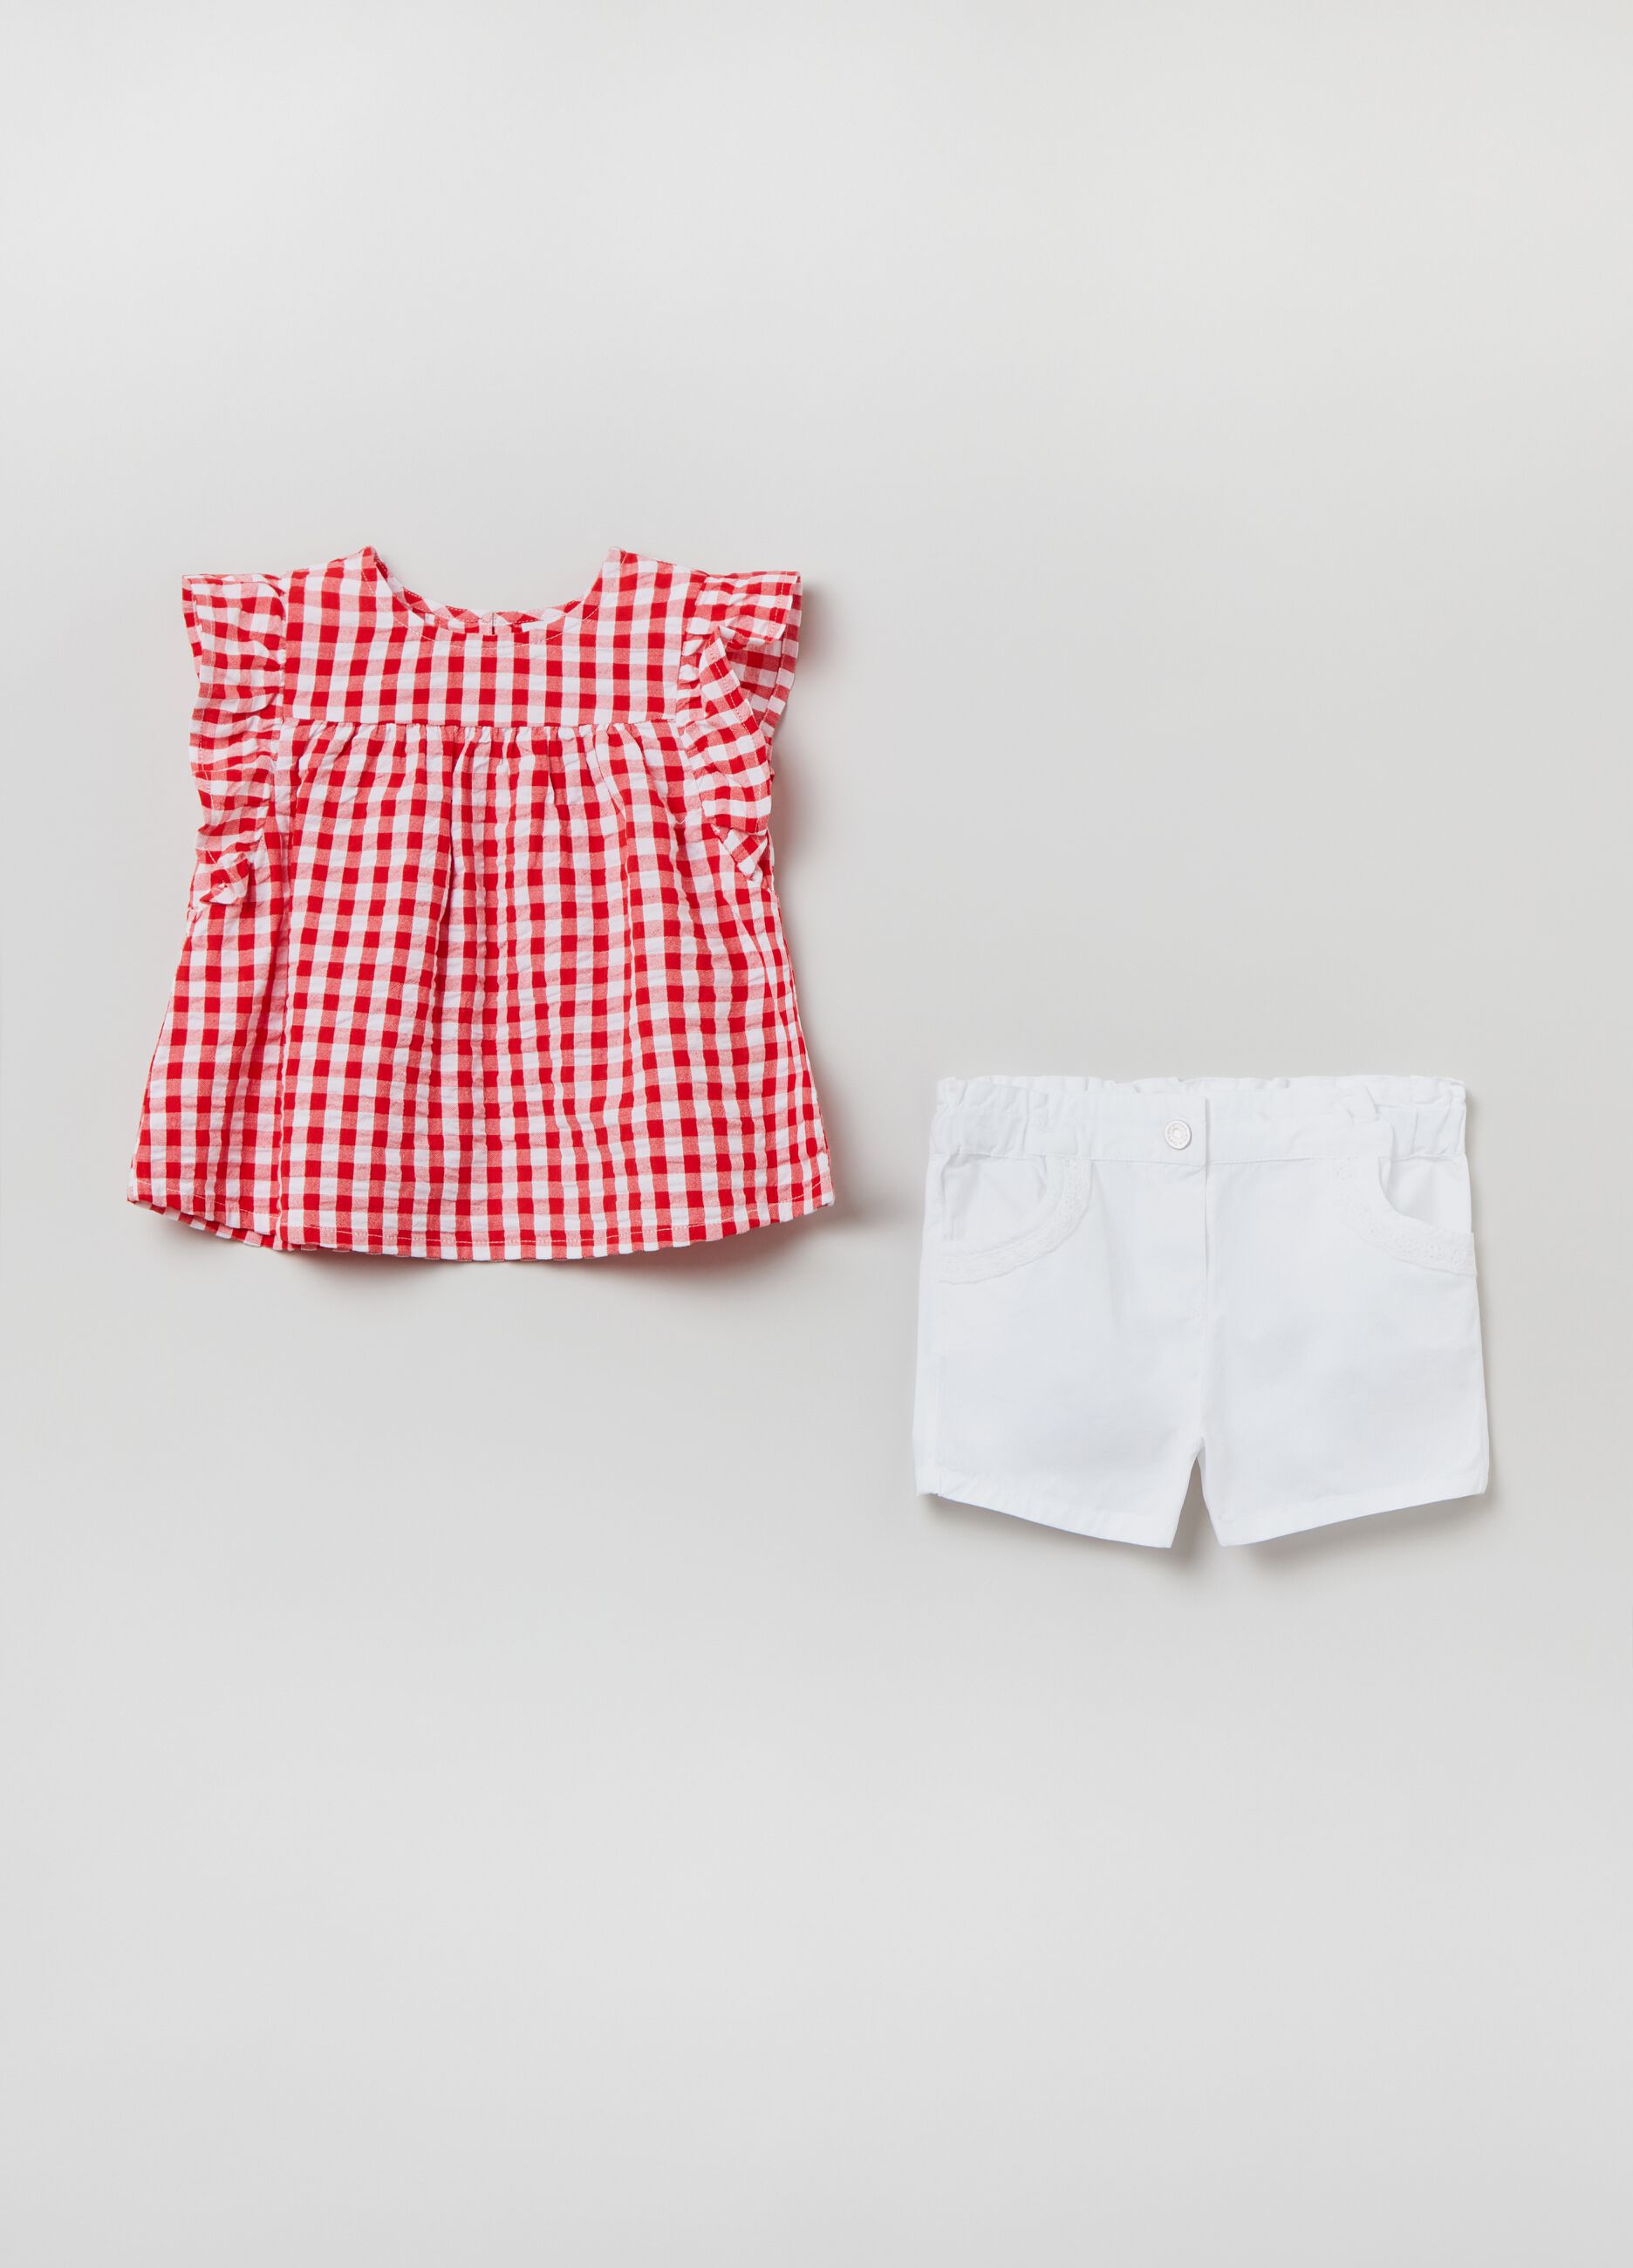 Gingham patterned blouse and shorts set